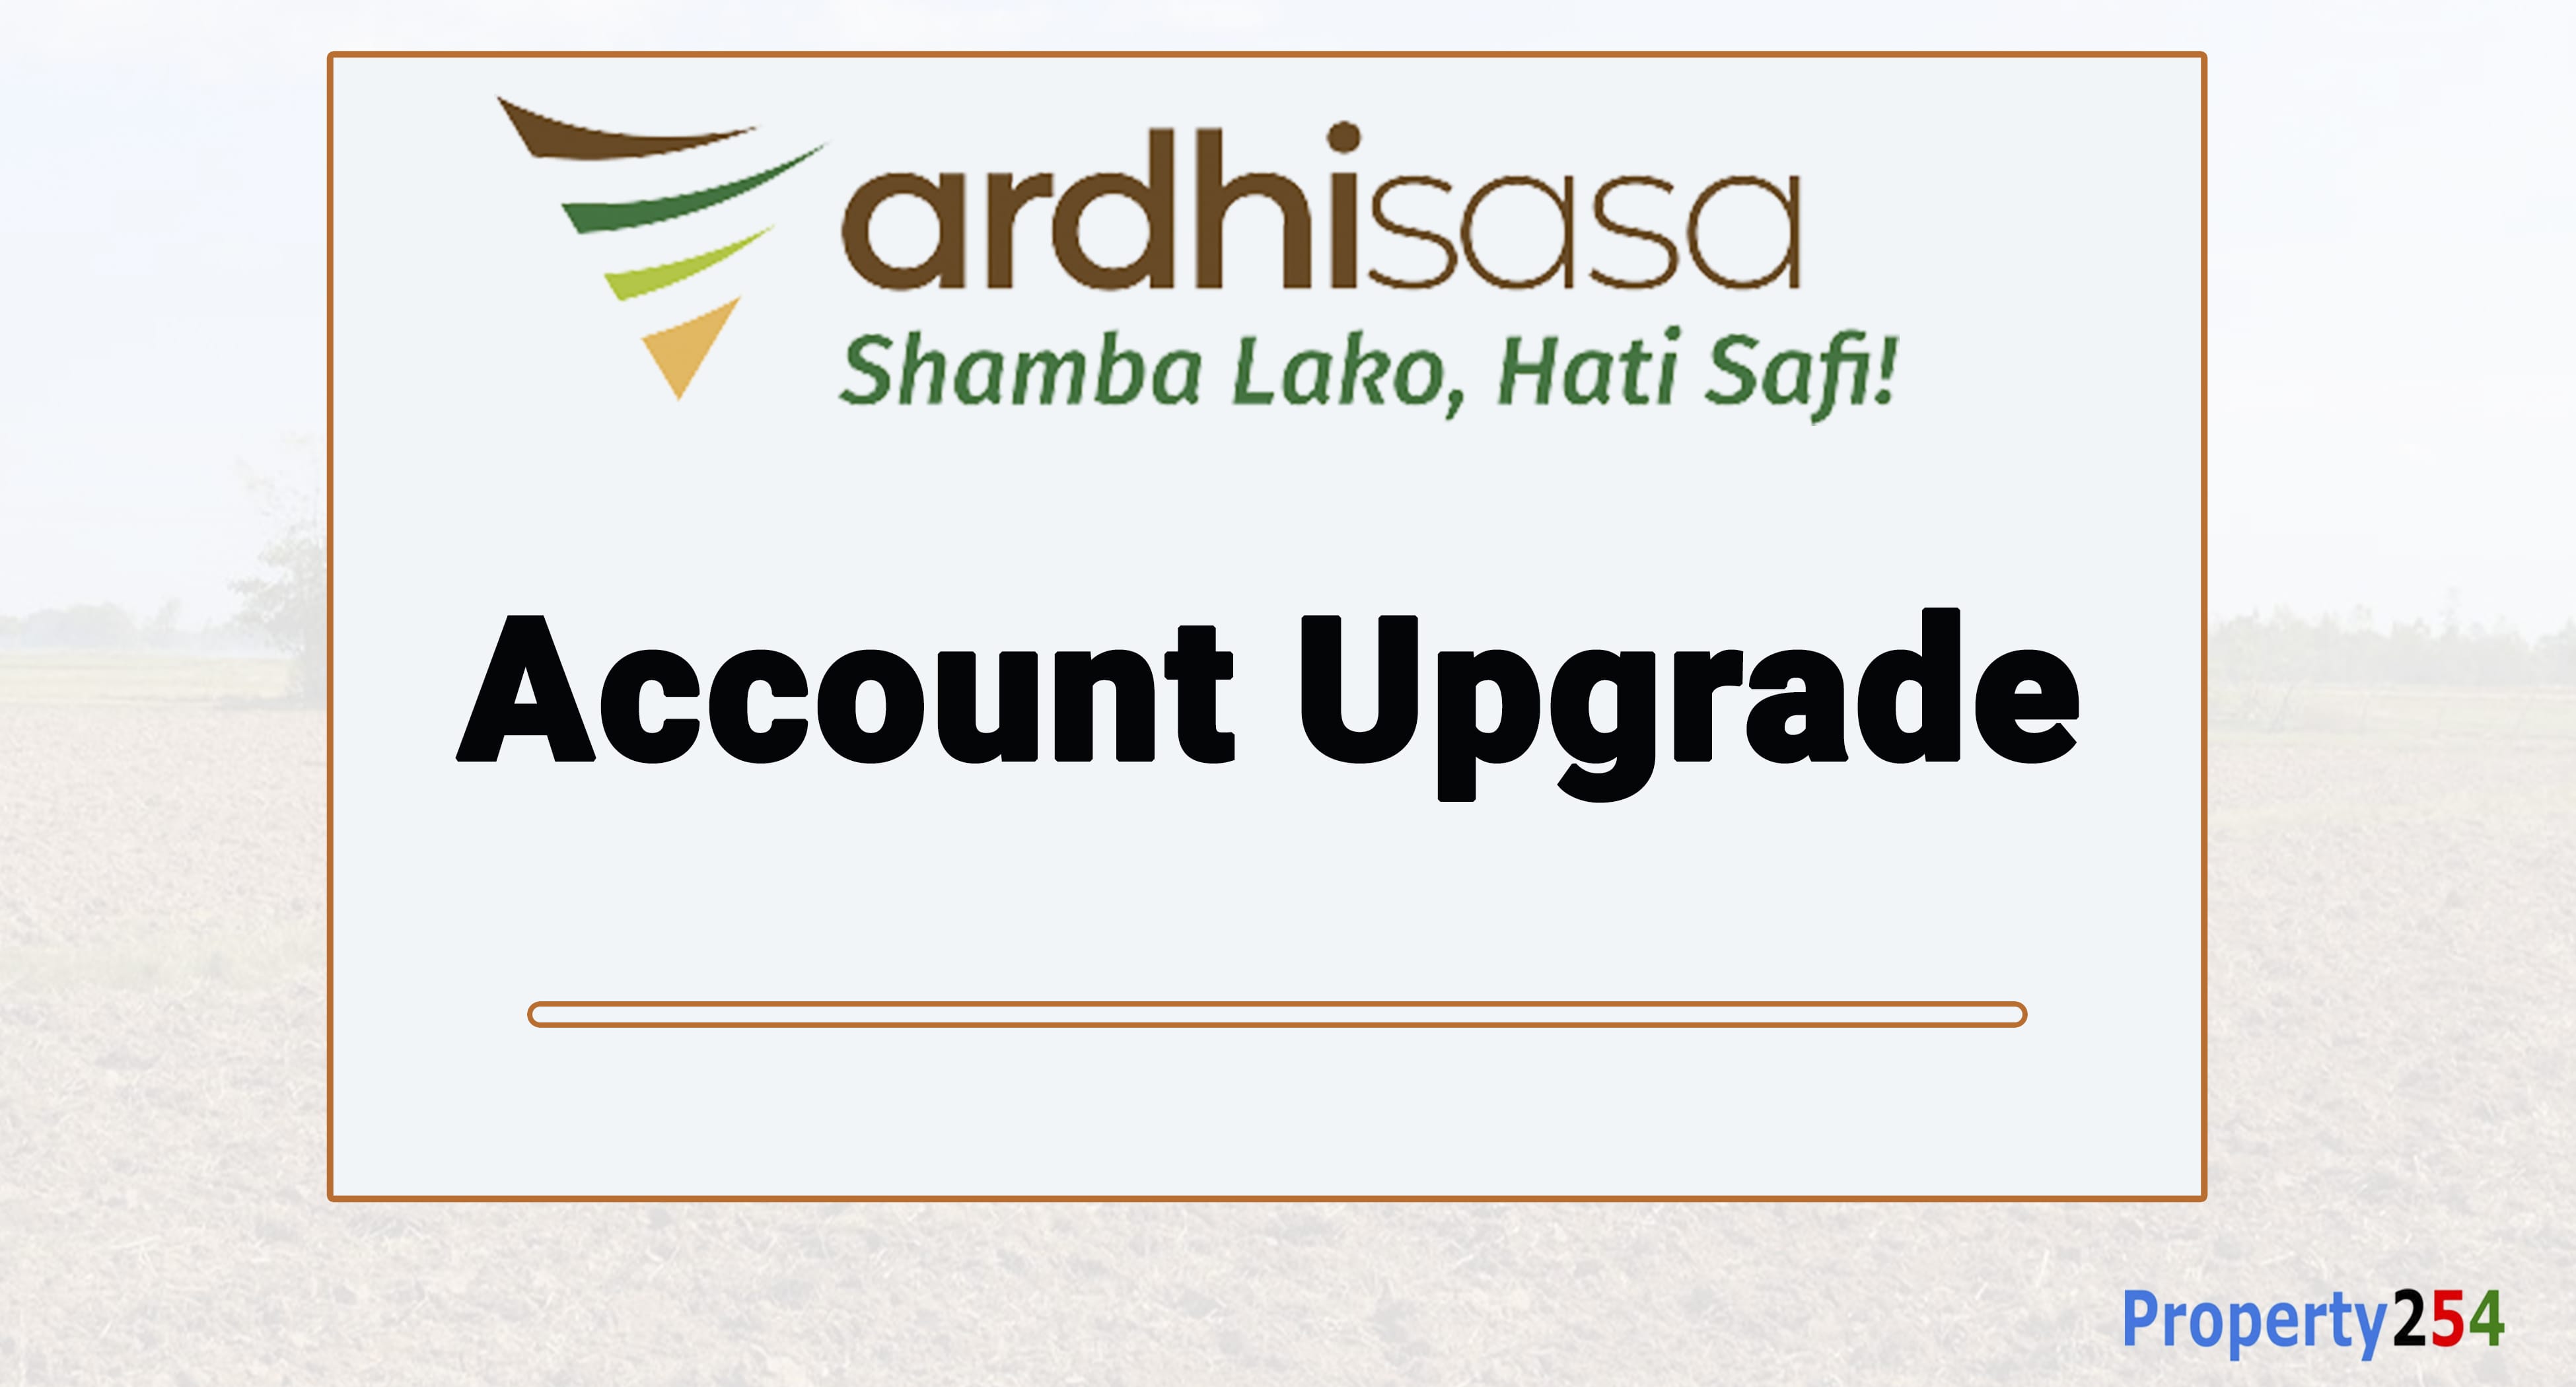 How to Upgrade your Account on Ardhisasa thumbnail